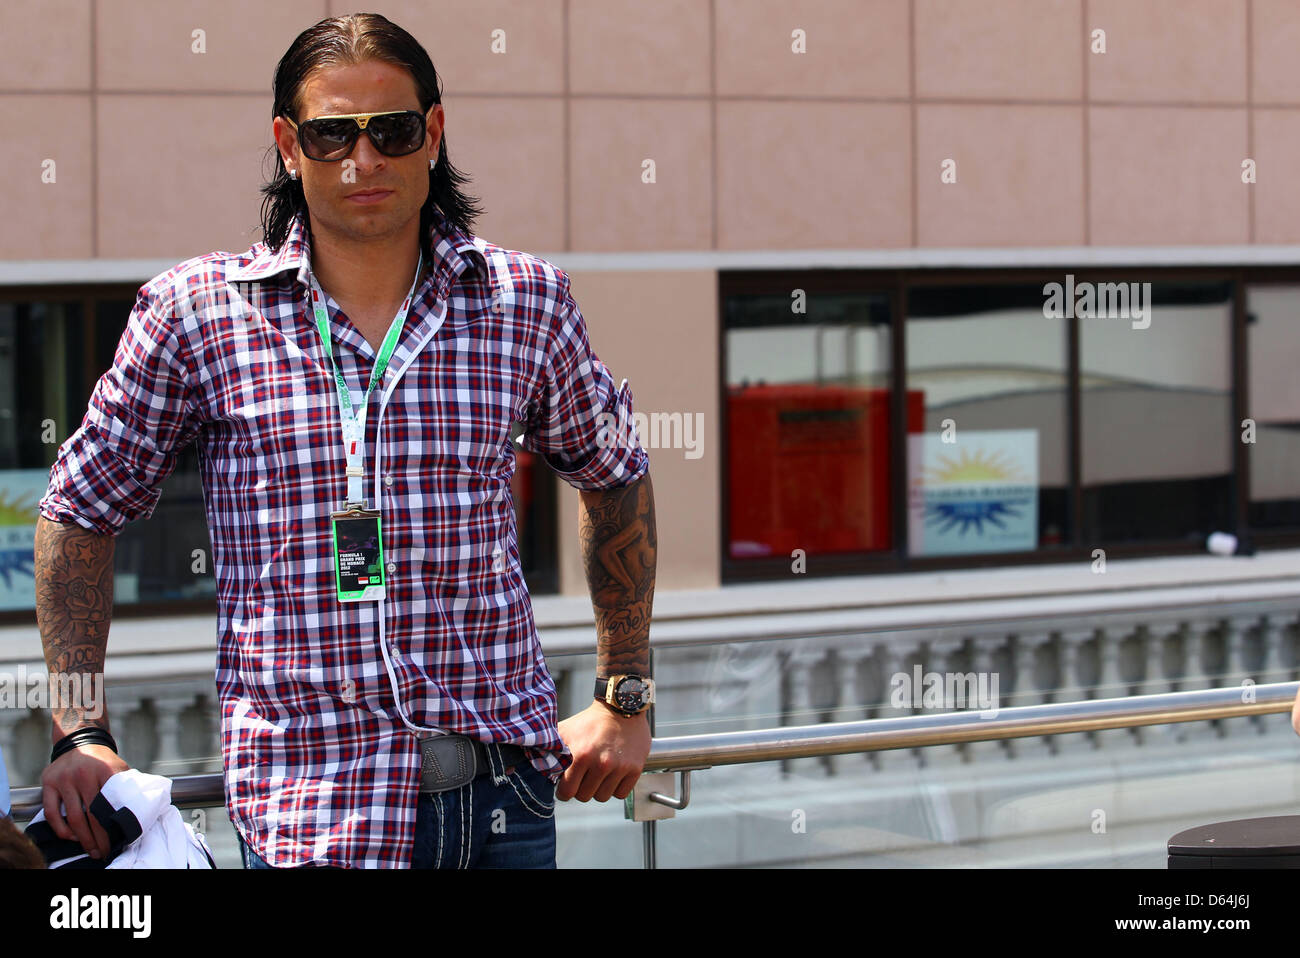 German national soccer player Tim Wiese before the start of the race at the F1 race track of Monte Carlo, Monaco, 27 May 2012. The Monaco Formula One Grand Prix is the sixth of 20 season races and go over 78 laps. Photo: Jens Buettner Stock Photo